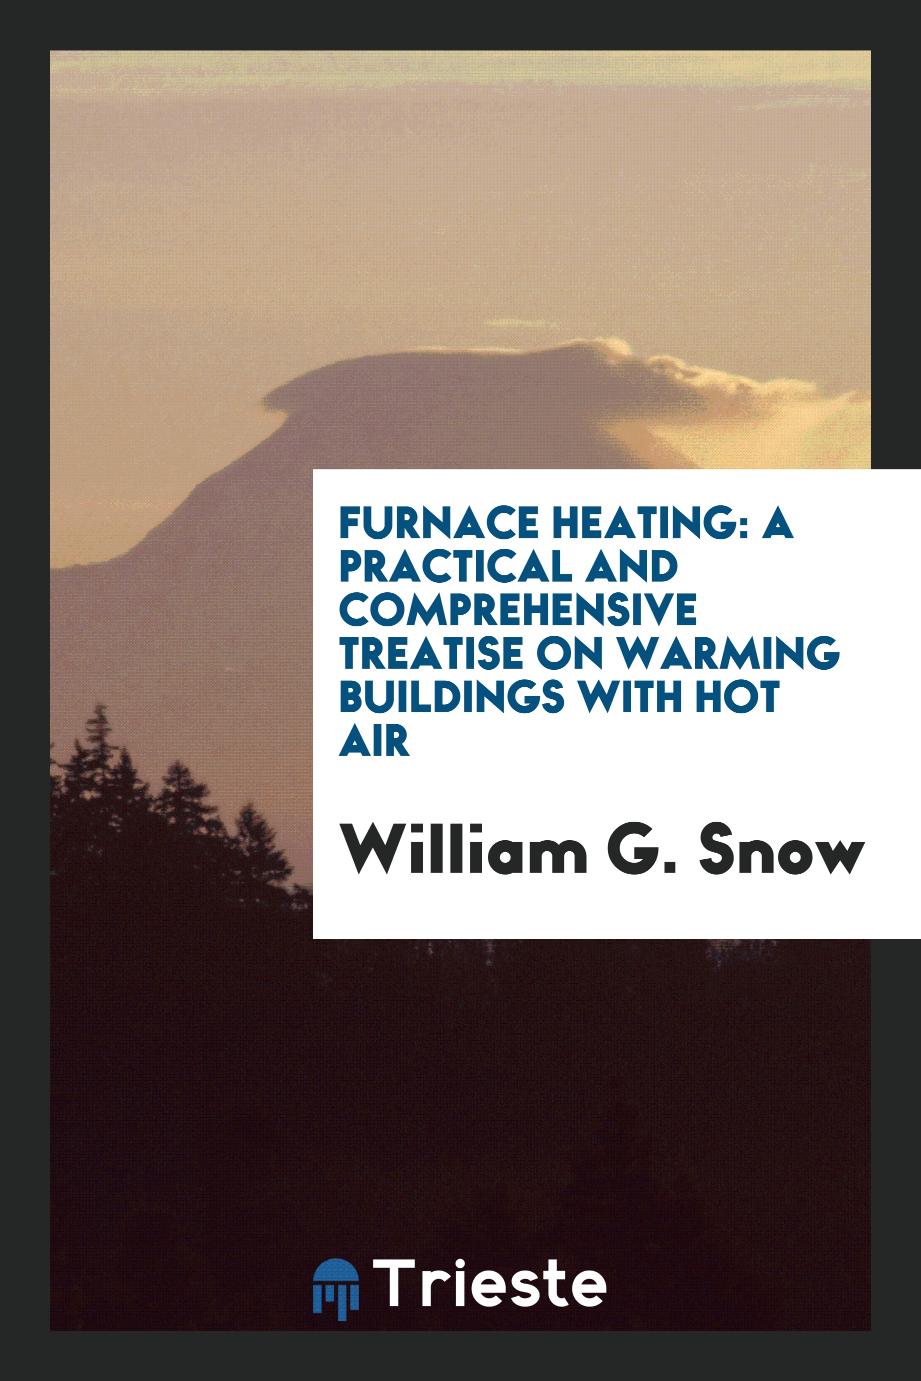 Furnace Heating: A Practical and Comprehensive Treatise on Warming Buildings with Hot Air